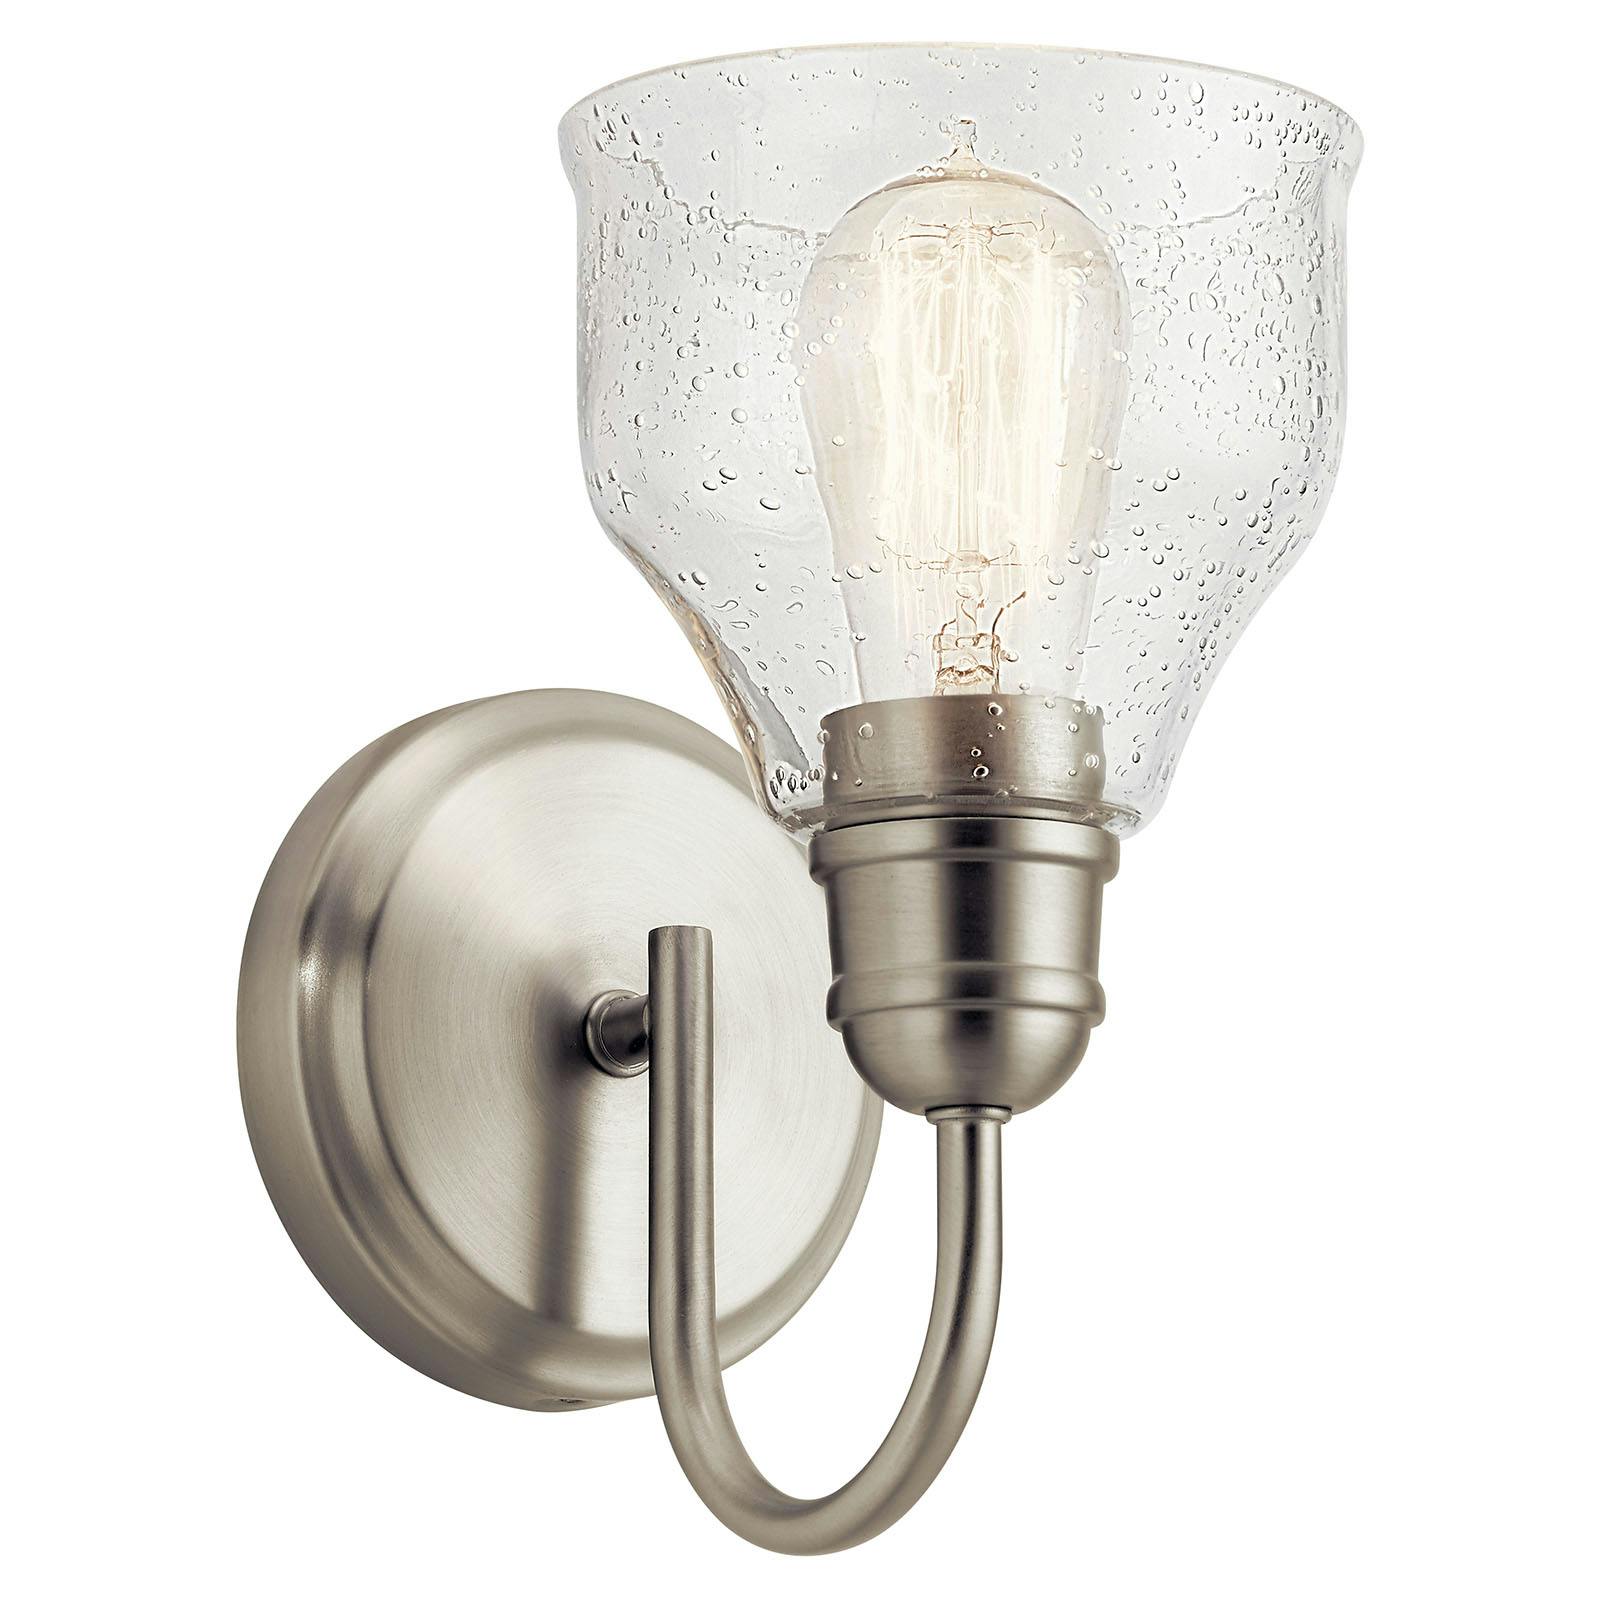 The Avery 9.25" 1 Light Vanity Light Nickel facing up on a white background